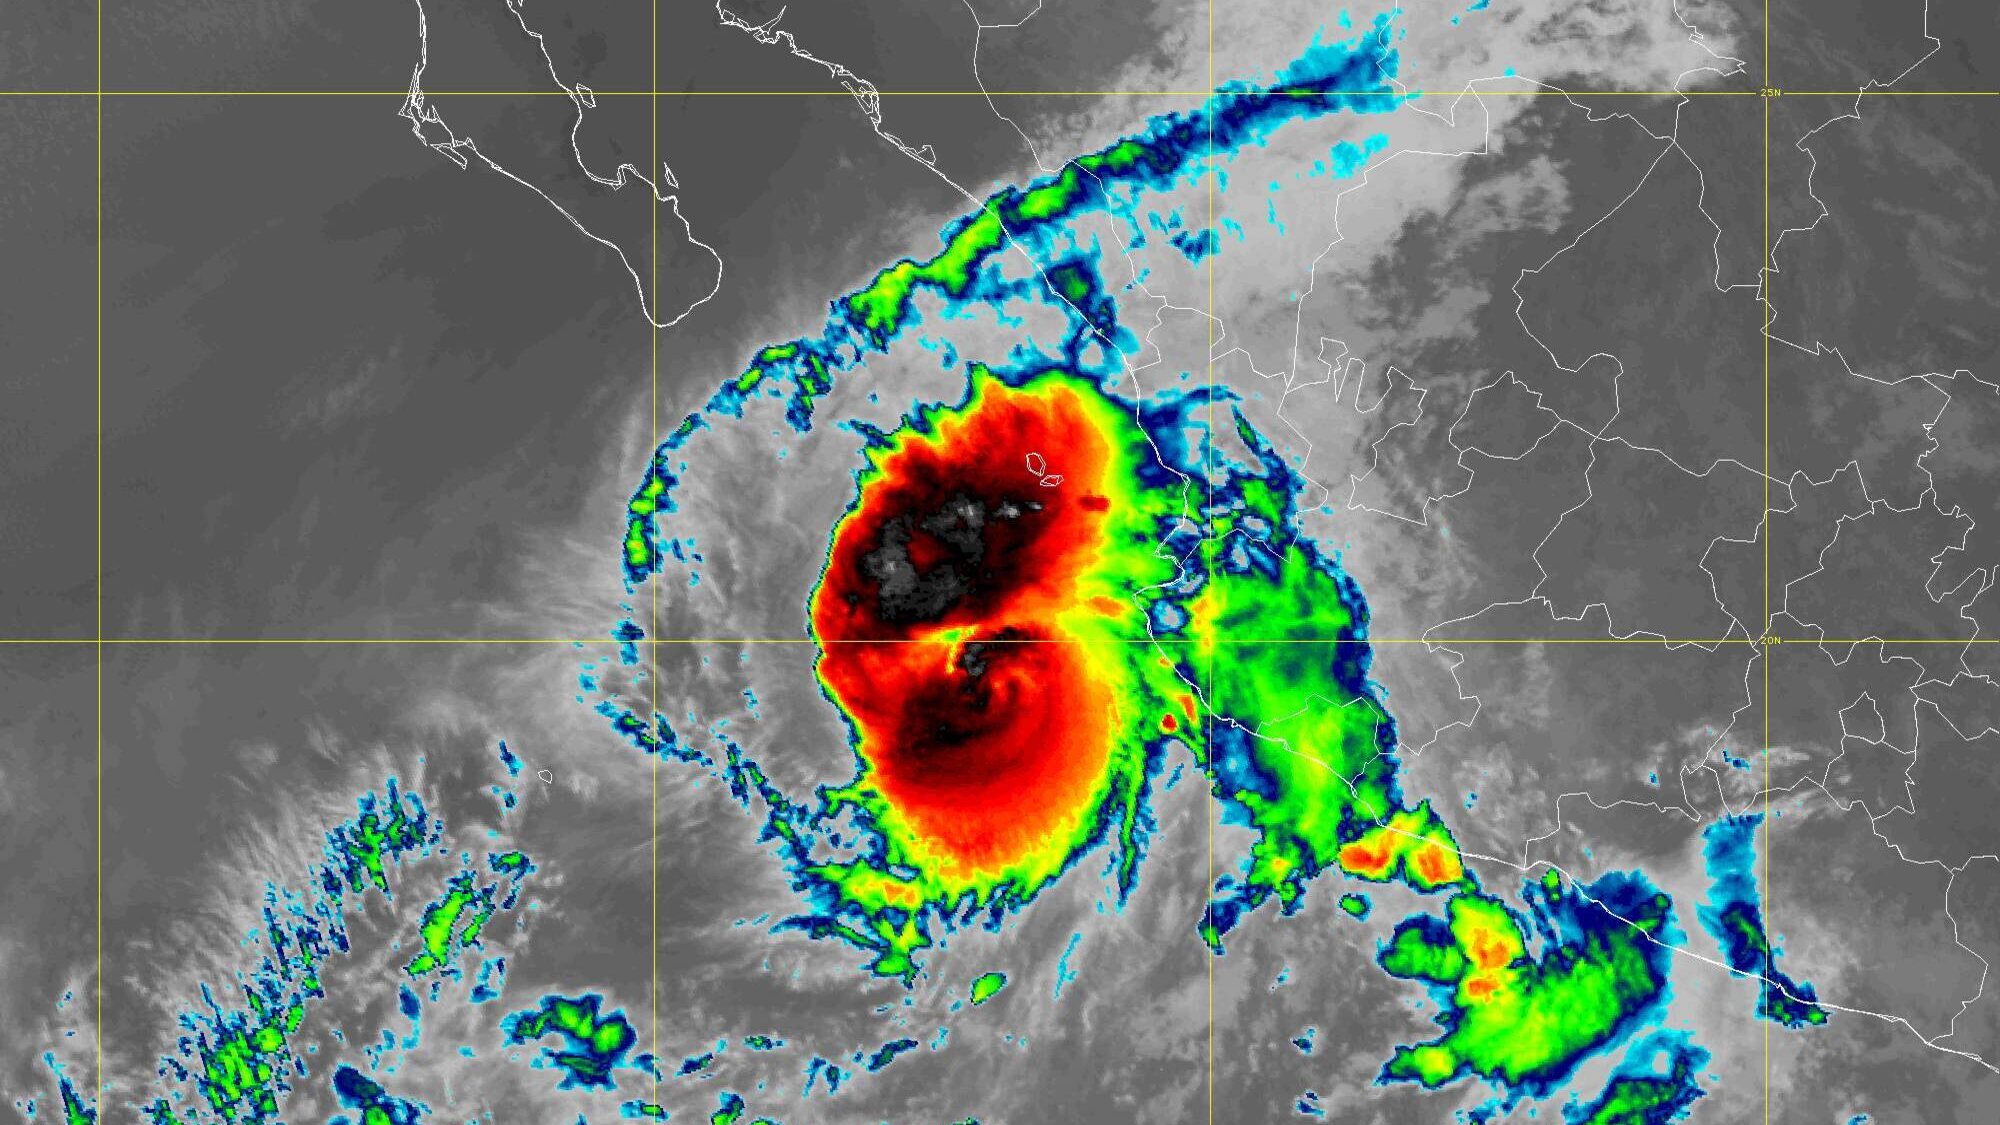 Category 3 Hurricane Orlene Heads for Mexico’s Pacific Coast